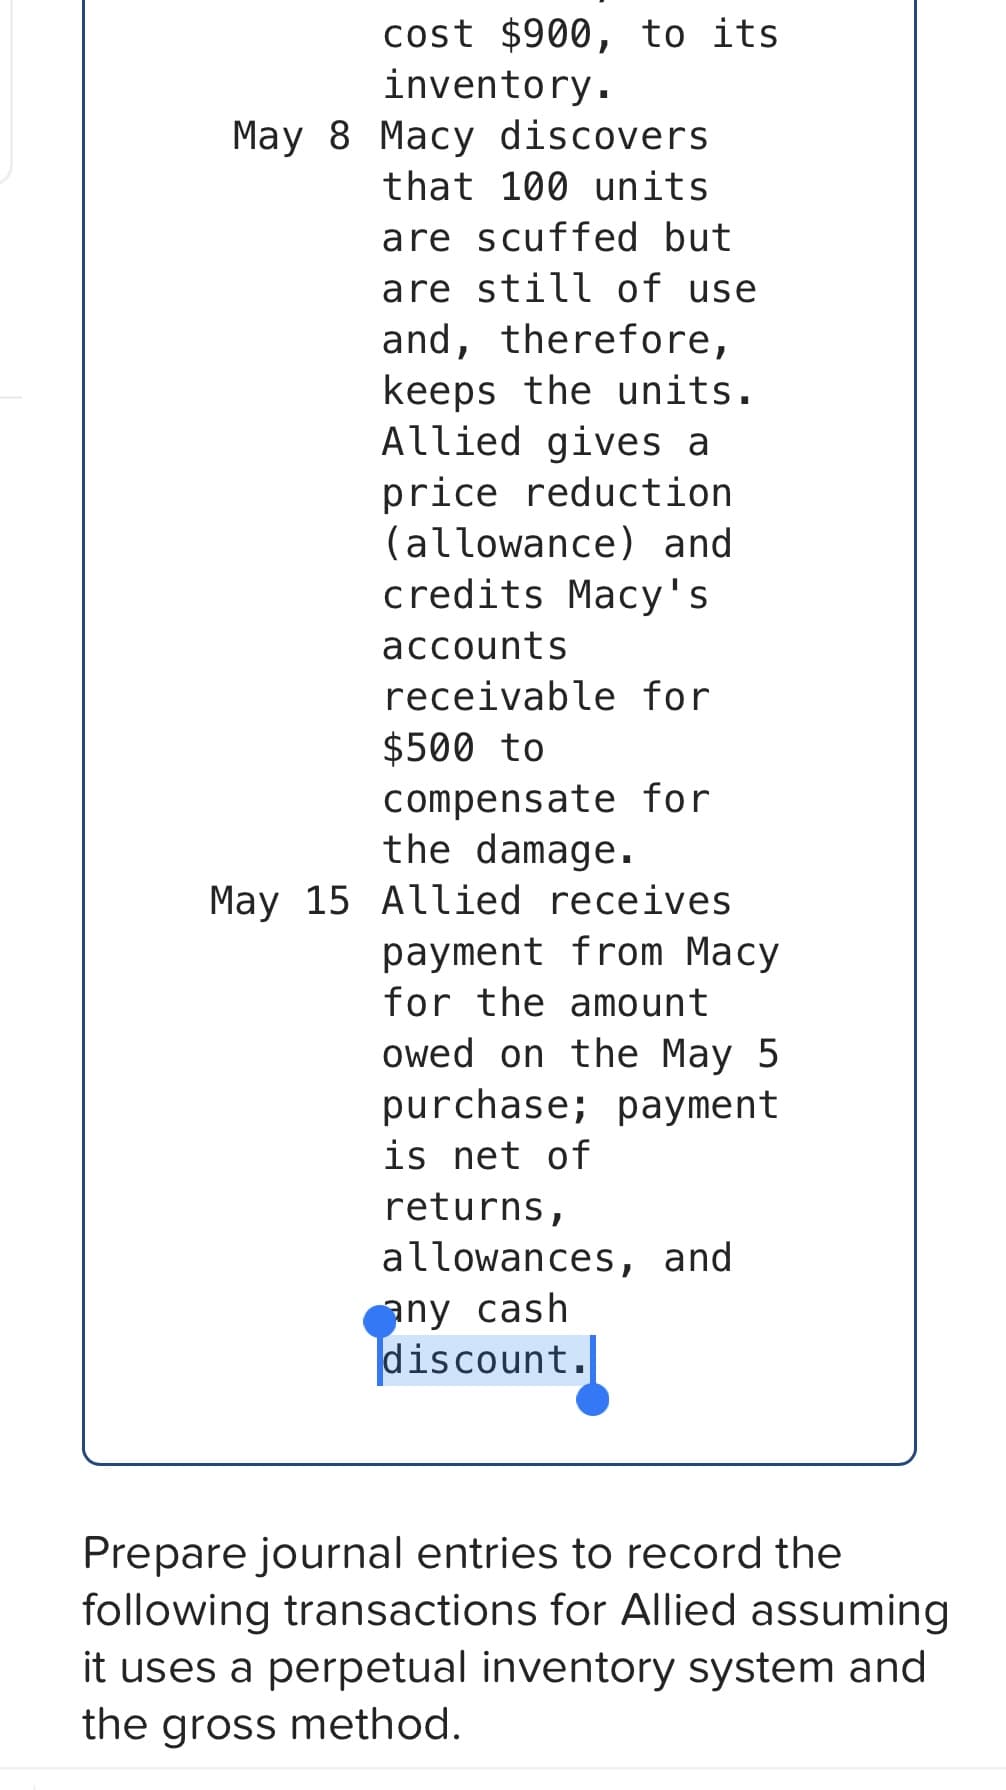 cost $900, to its
inventory.
May 8 Macy discovers.
that 100 units
are scuffed but
are still of use
and, therefore,
keeps the units.
Allied gives a
price reduction
(allowance) and
credits Macy's
accounts
receivable for
$500 to
compensate for
the damage.
May 15 Allied receives
payment from Macy
for the amount
owed on the May 5
purchase; payment
is net of
returns,
allowances, and
any cash
discount.
Prepare journal entries to record the
following transactions for Allied assuming
it uses a perpetual inventory system and
the gross method.